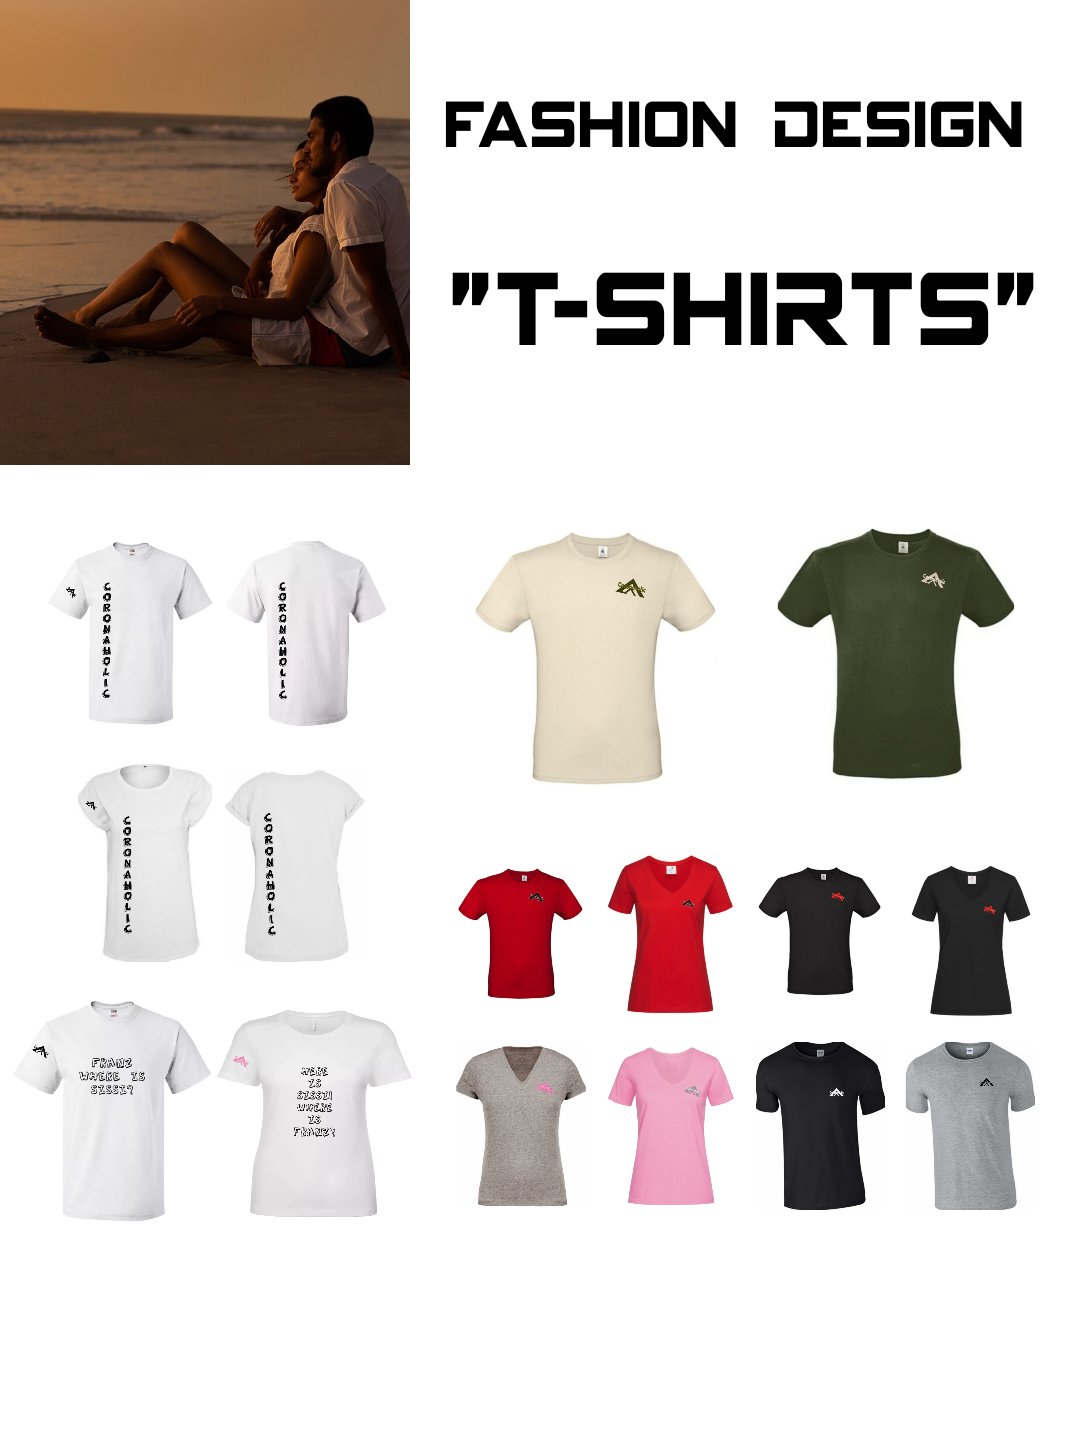 "T-Shirts for Ladies & Men" made by Coronaholic Design&Label